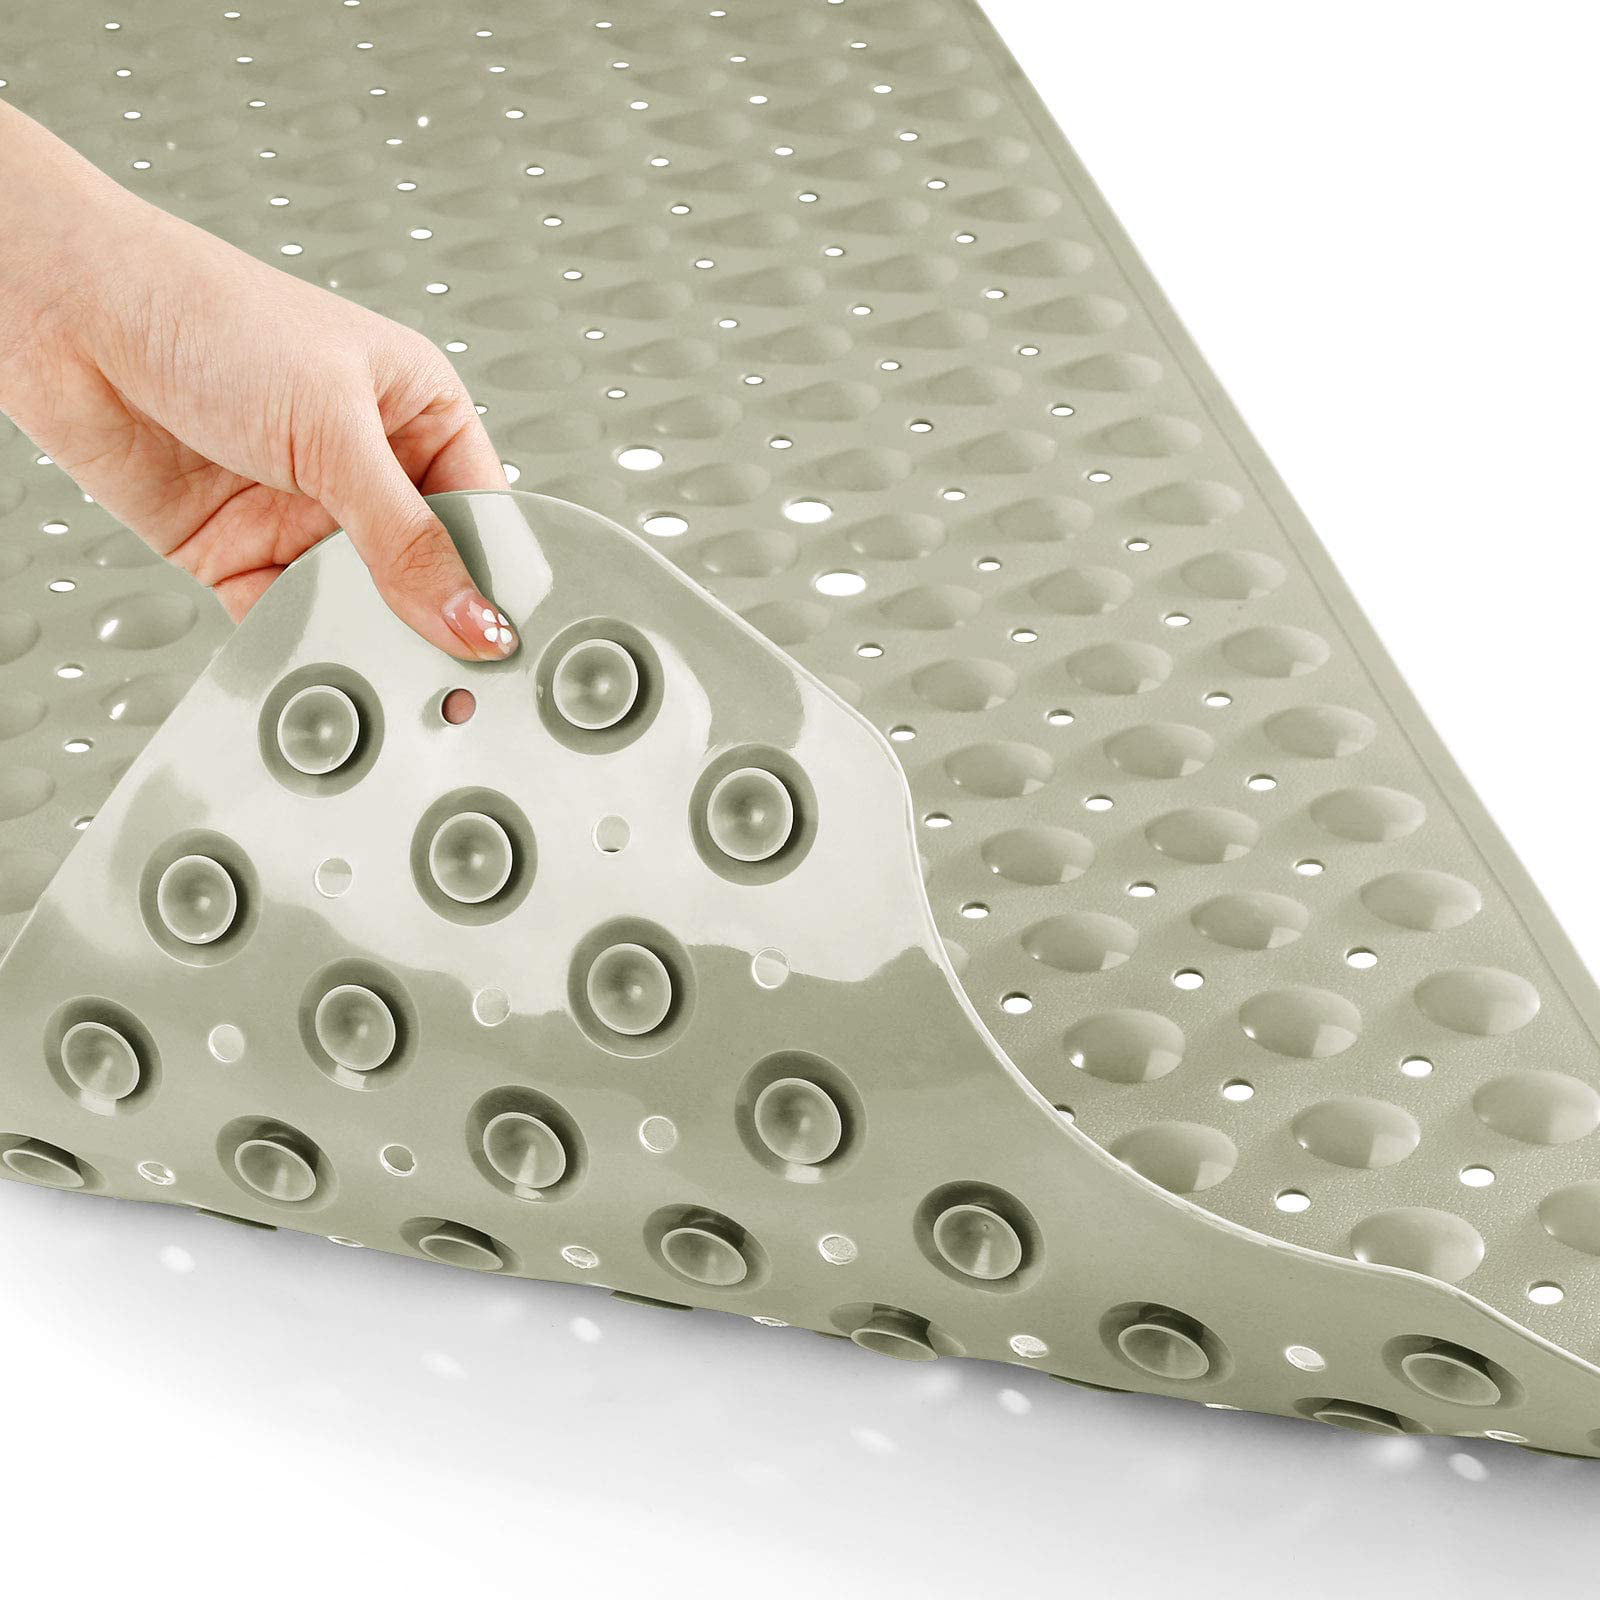 Bath Tub And Shower Mat Extra Long 16 X 40 Inch Non-Slip With Suction Cups 